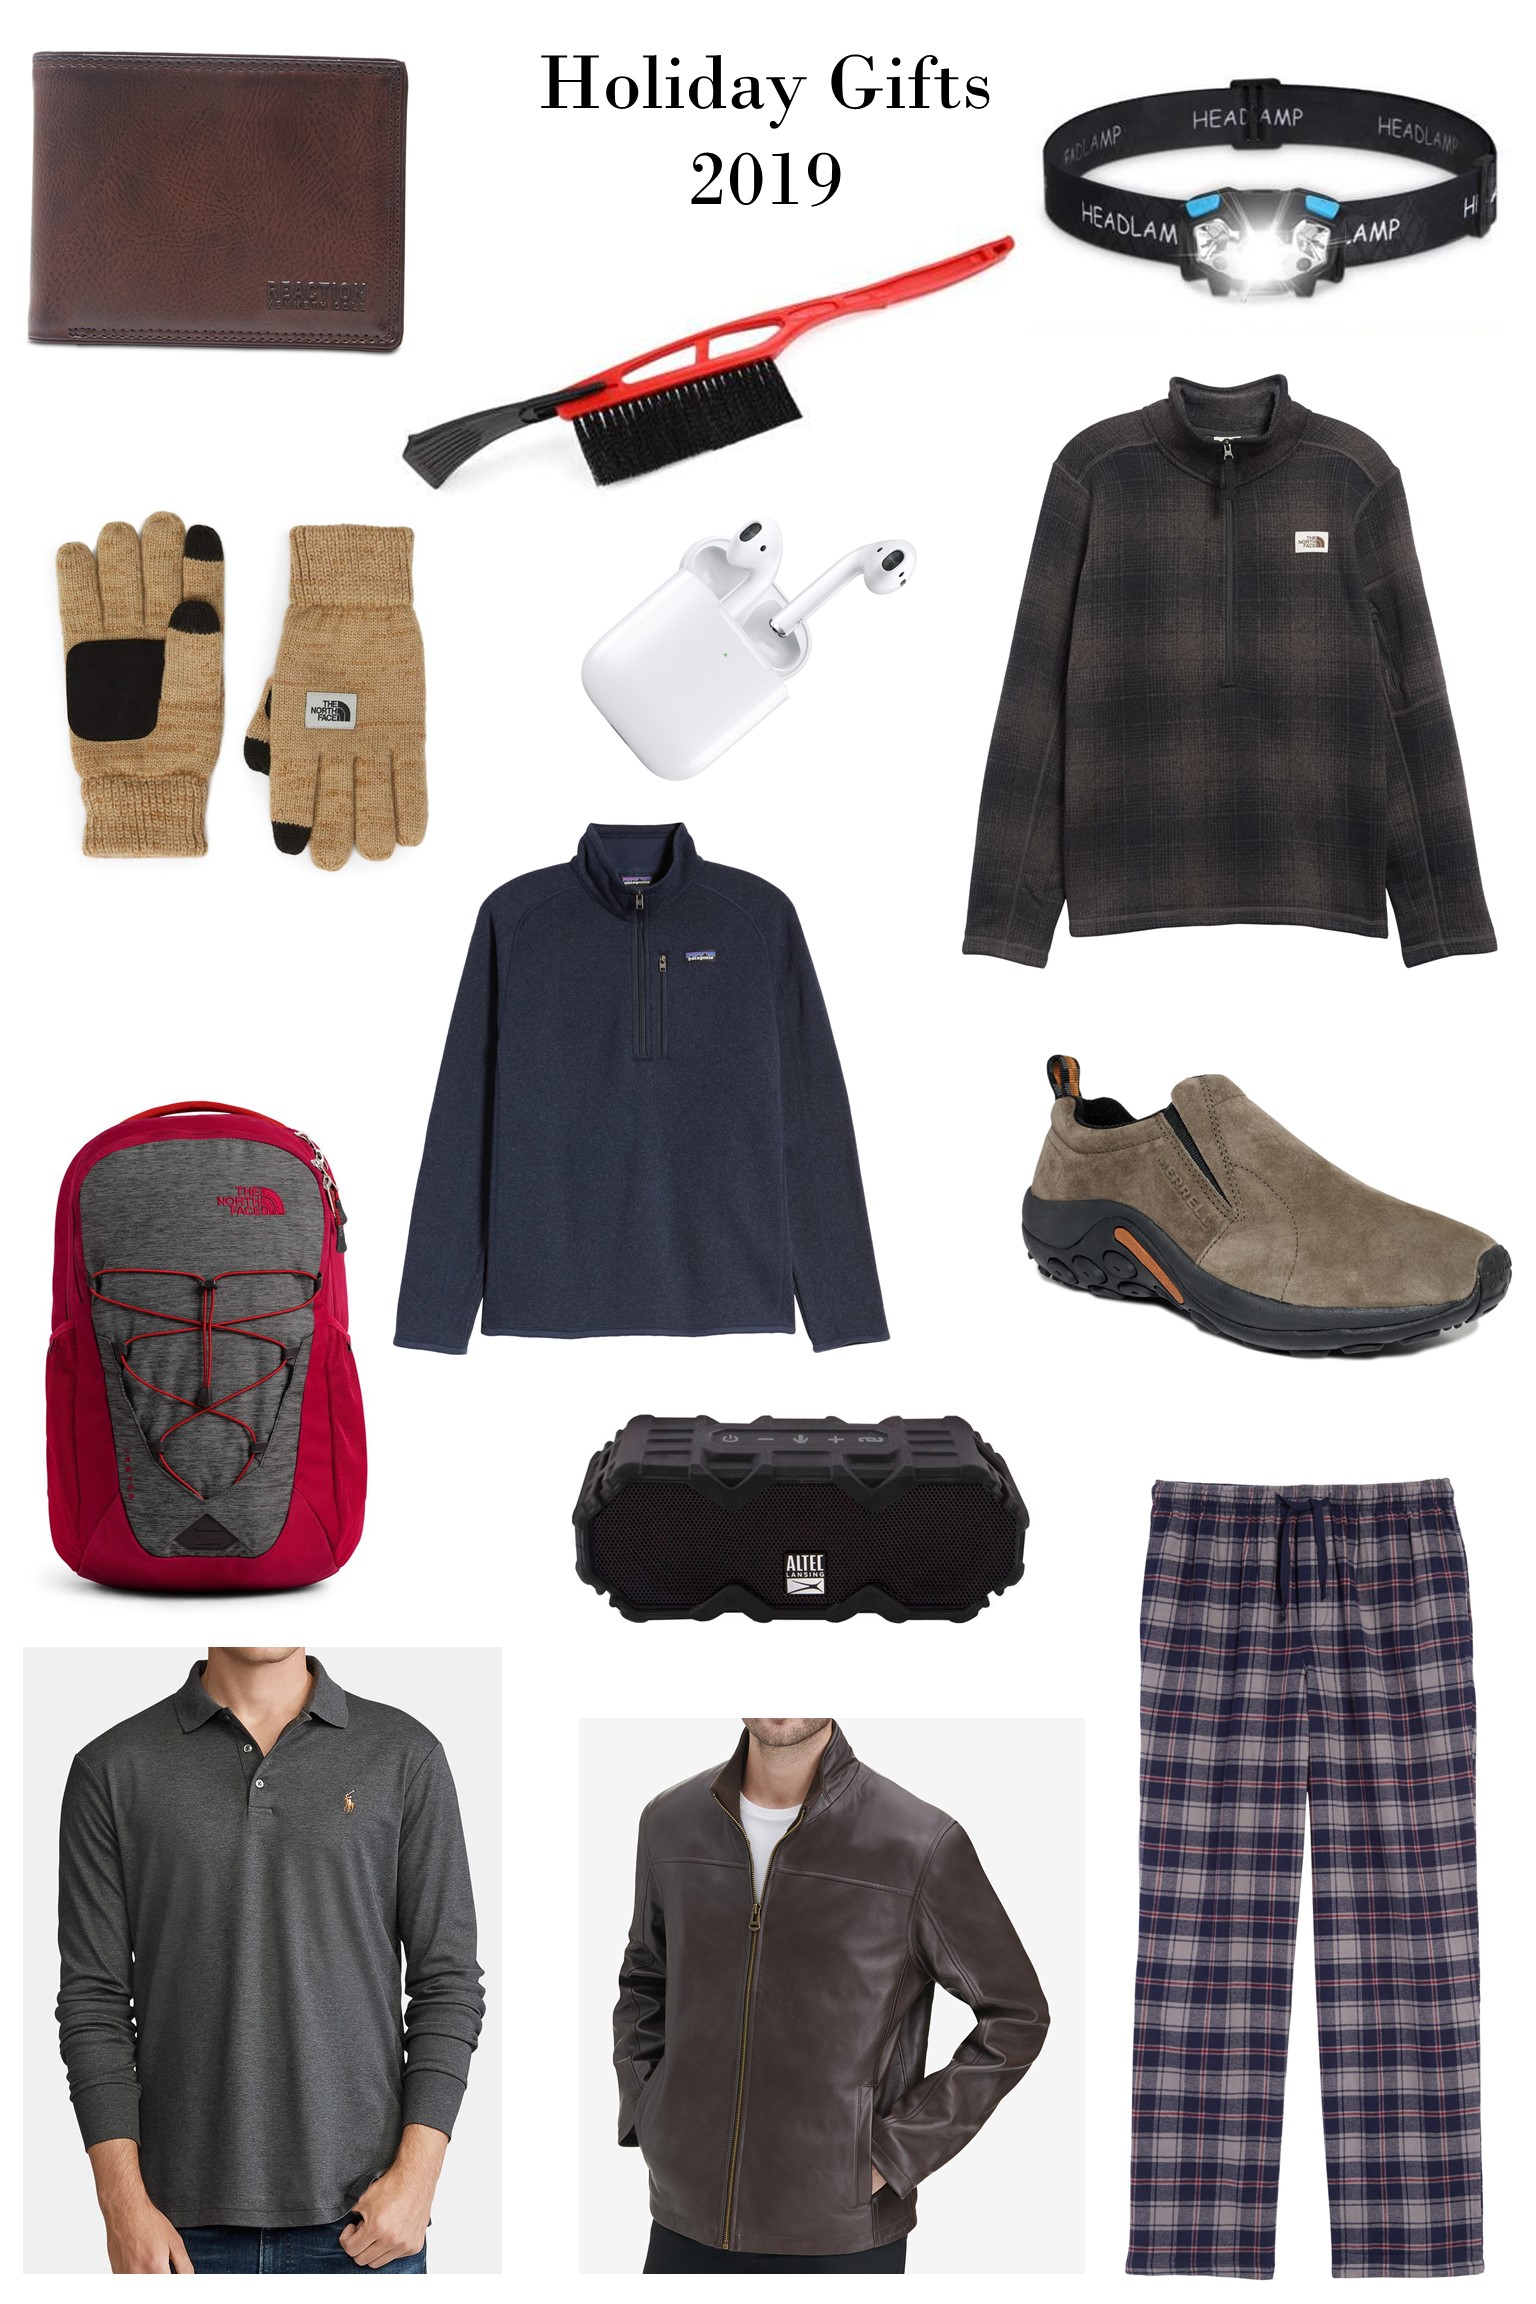 Holiday Gift Guide for Men